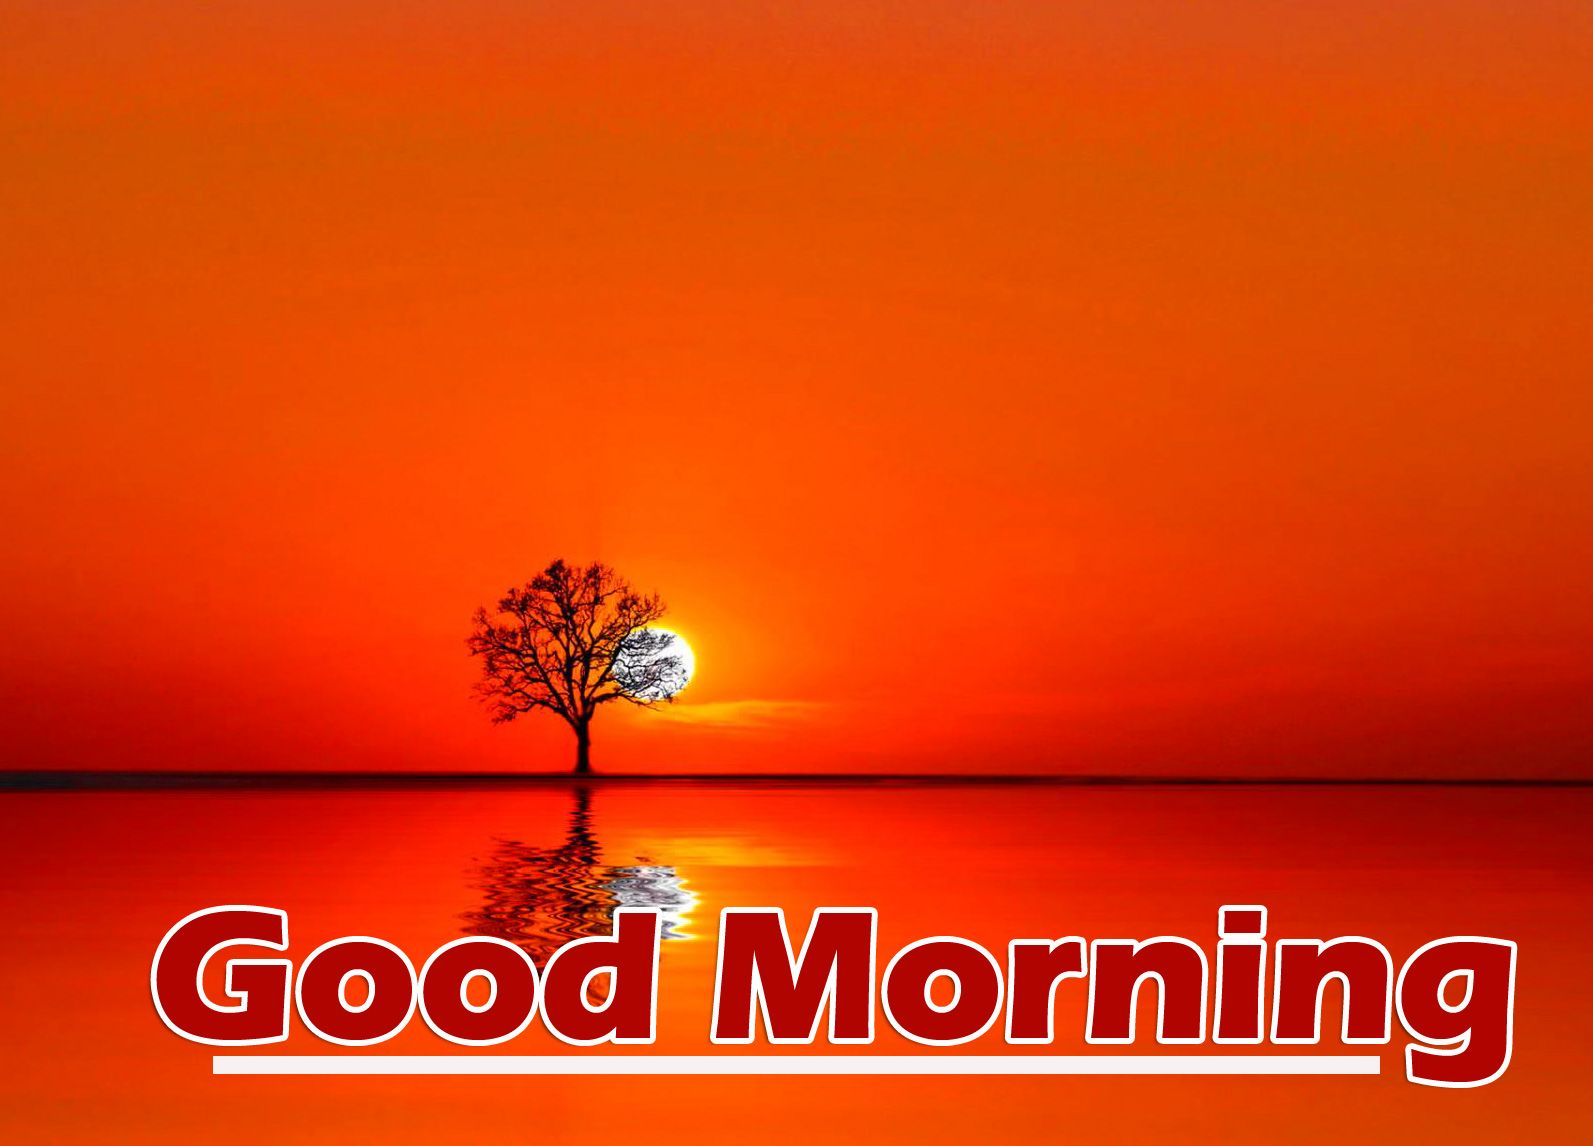 Good Morning Wallpaper Pictures Free Download 